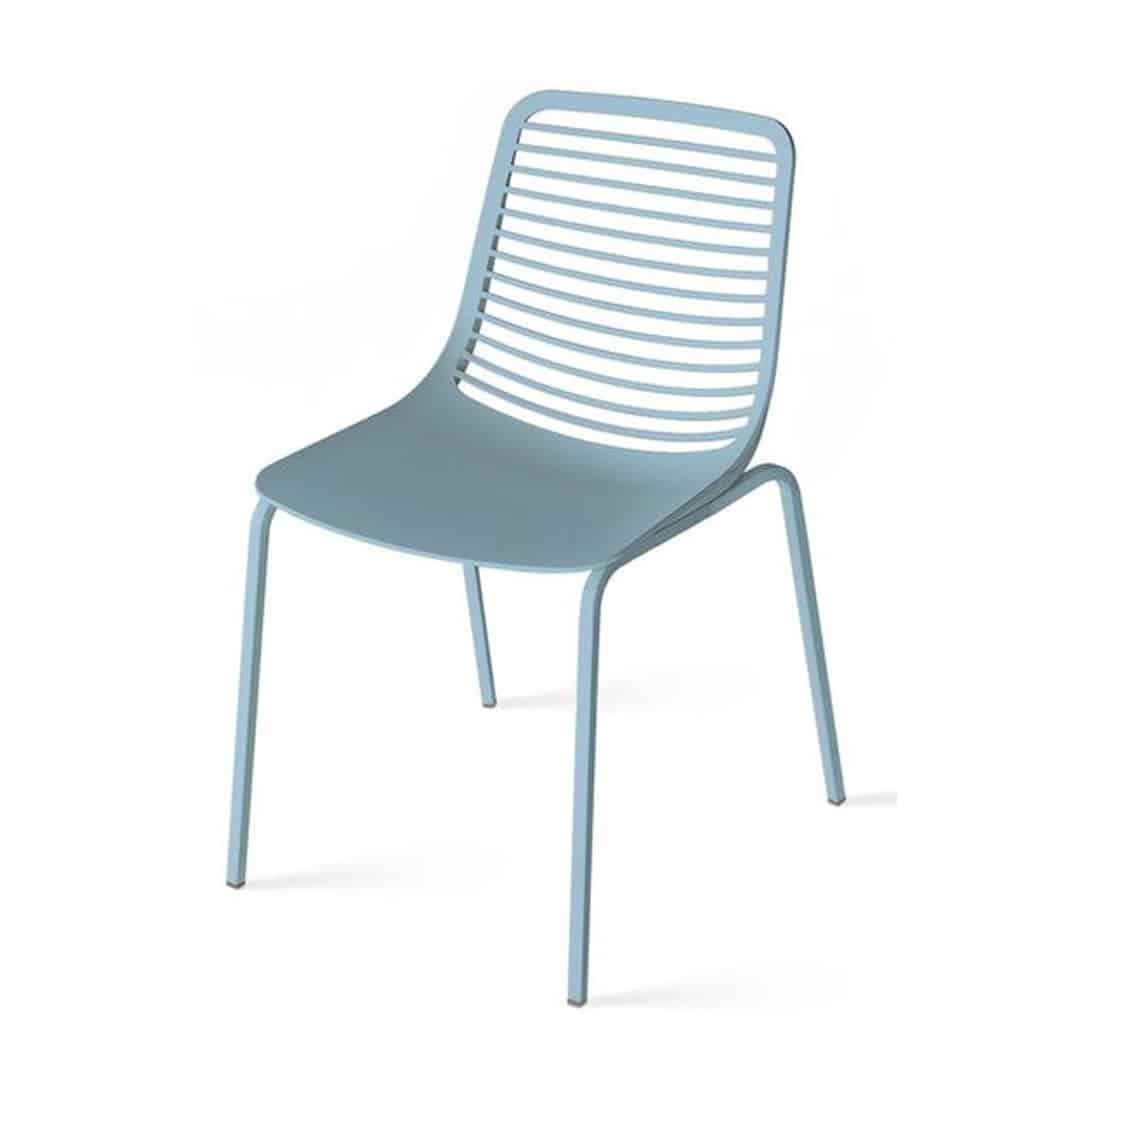 Mini side chair Casprini Stackable outside side chair DeFrae Contract Furniture metal frame blue